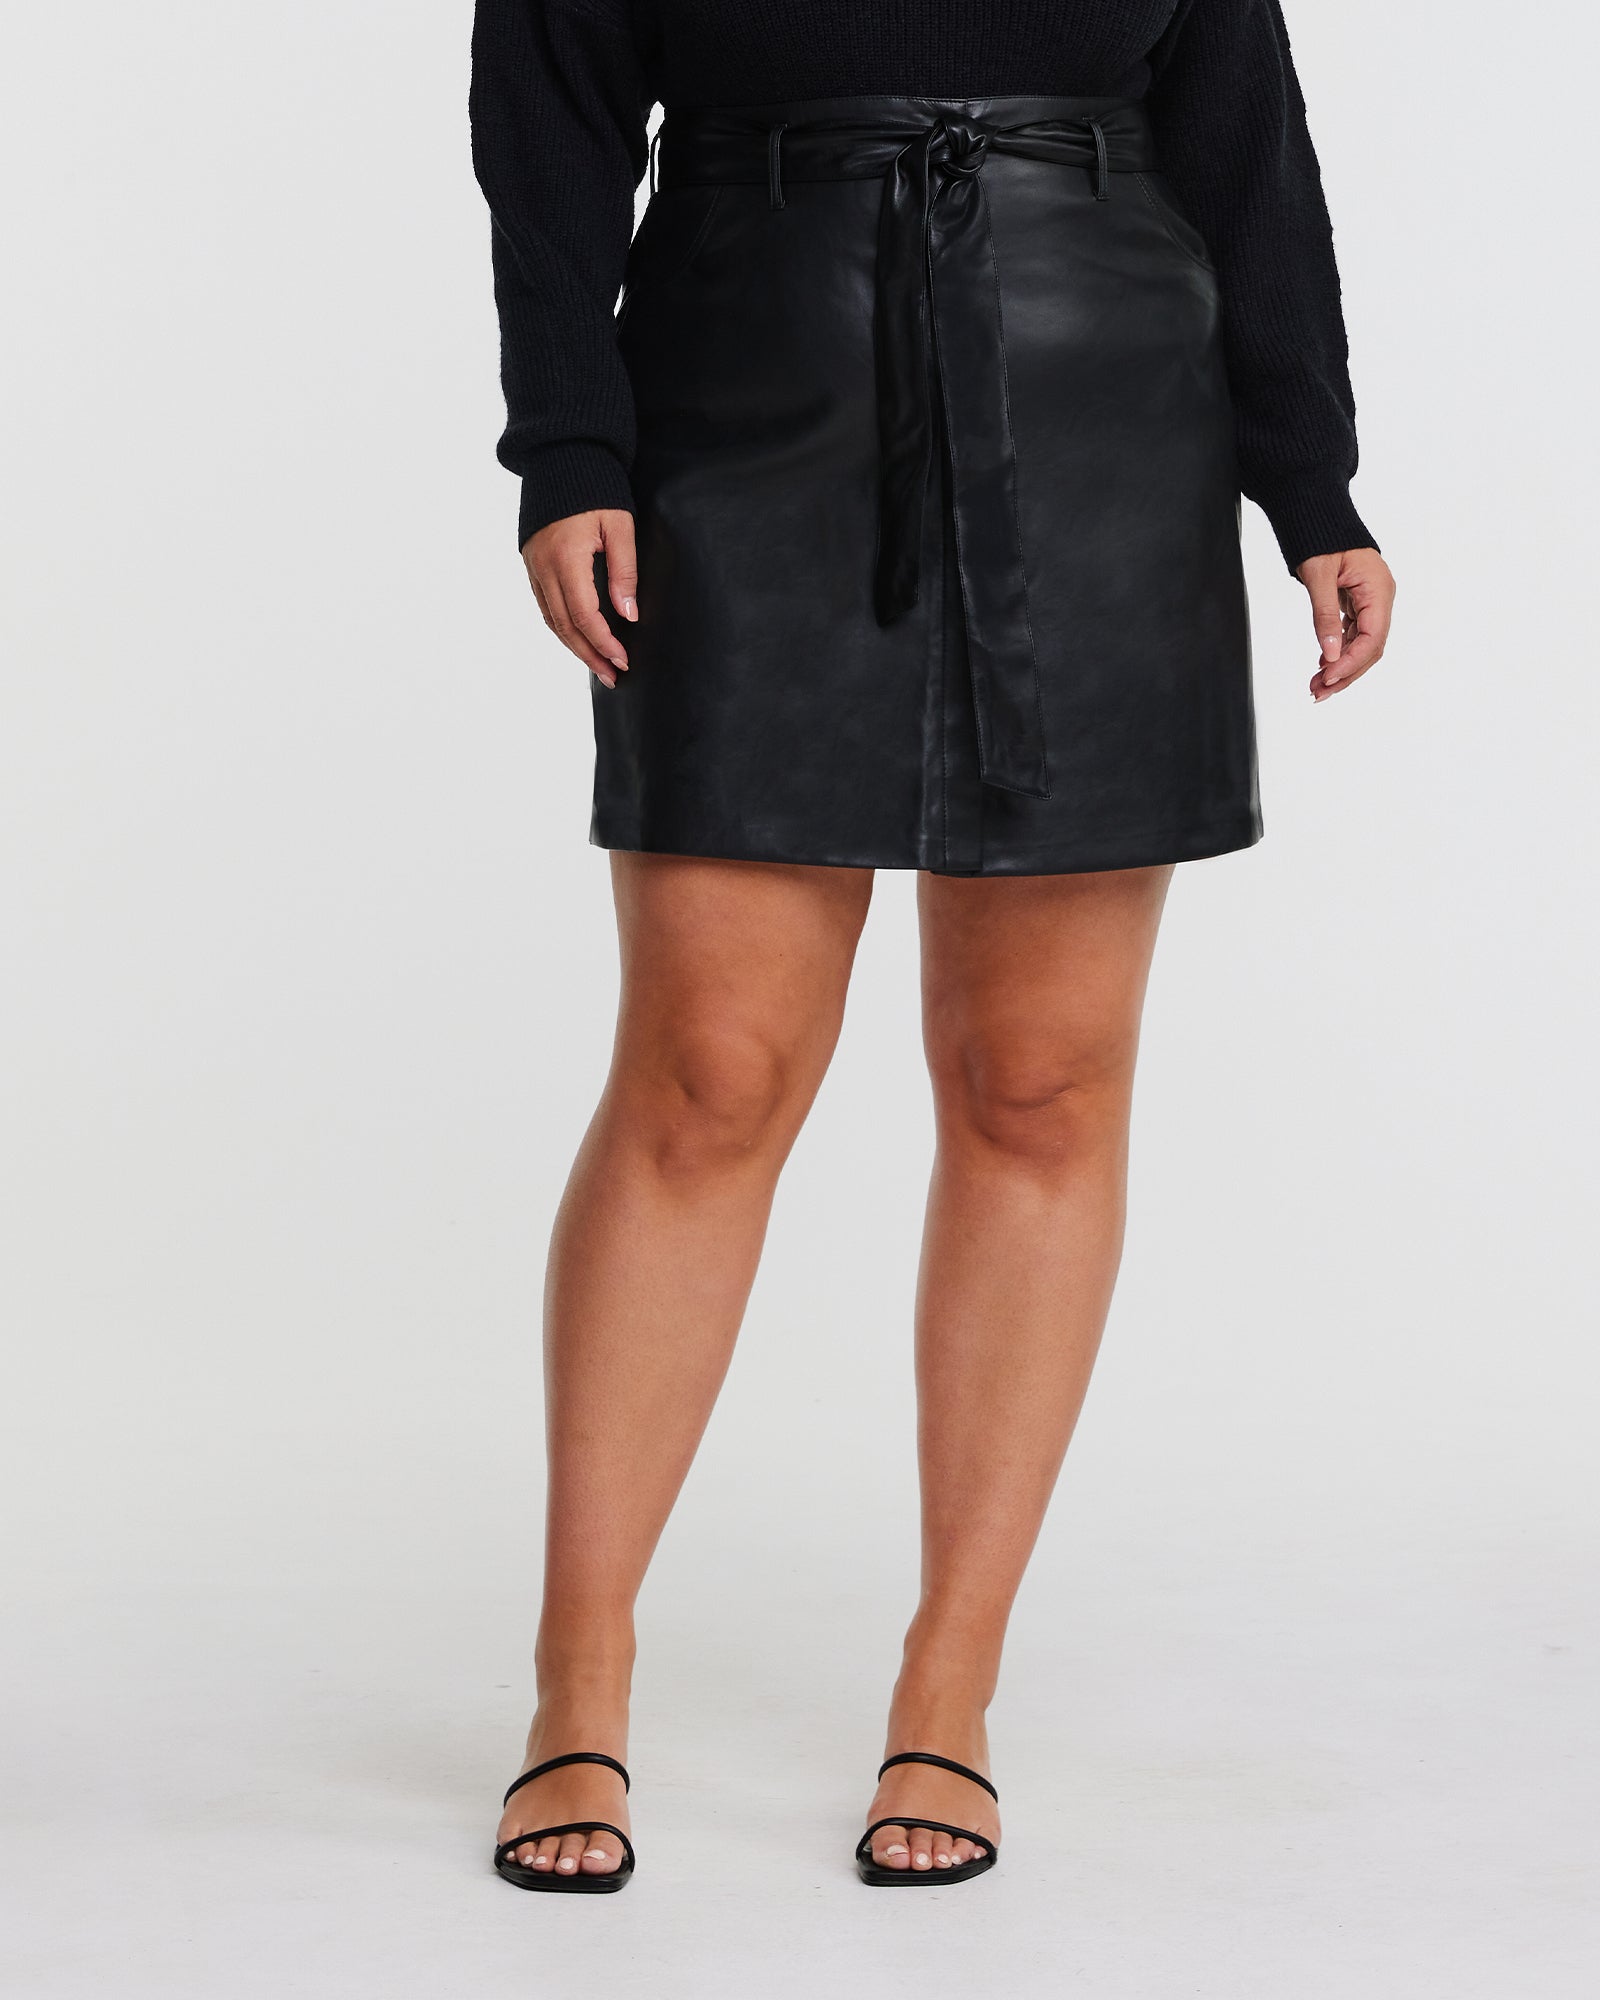 A plus-size fashionista wearing a Black PU Vegan Leather Belted Skirt.